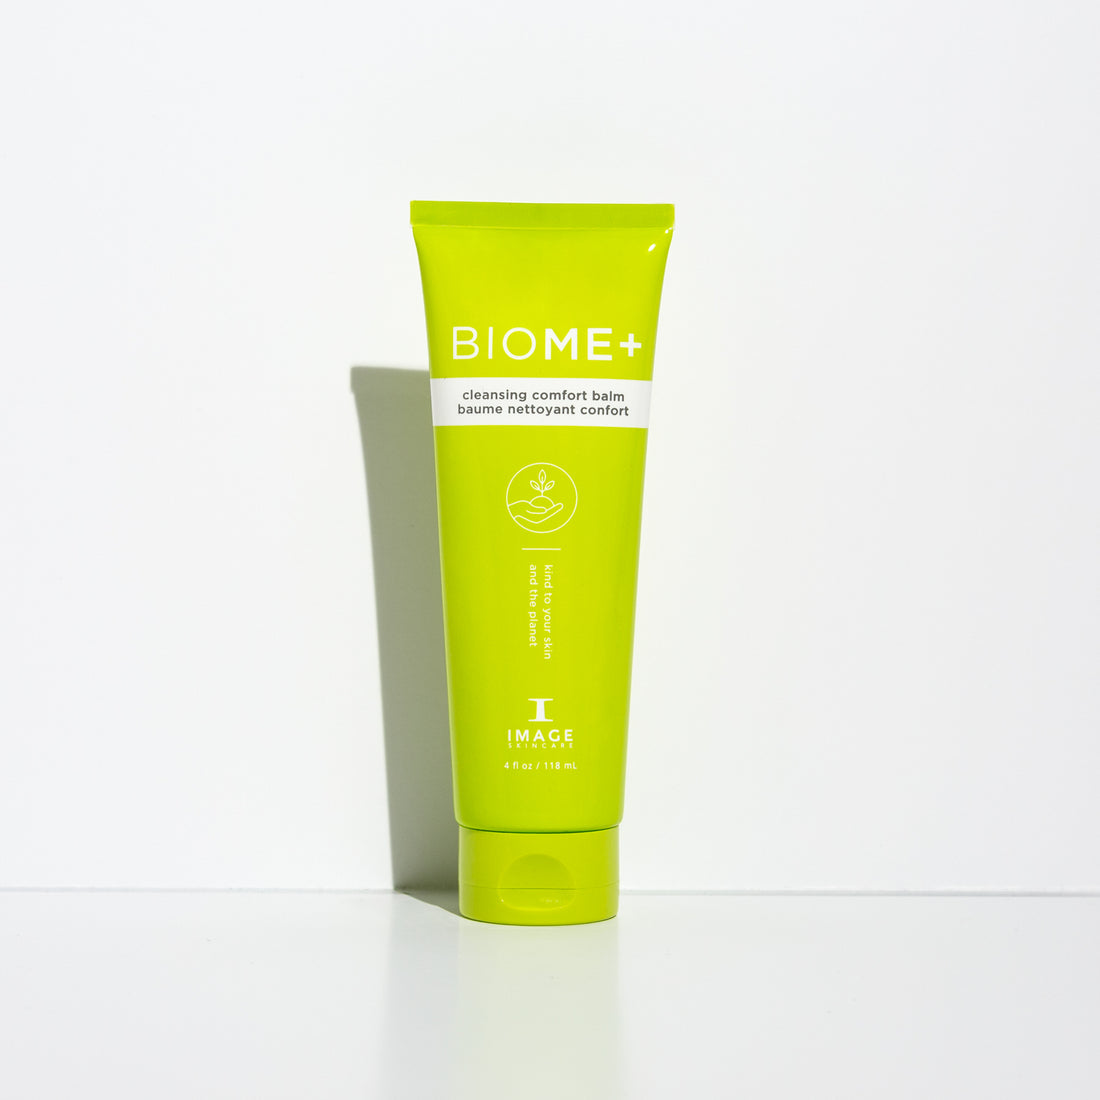 BIOME+ Cleansing Comfort Balm 118ml